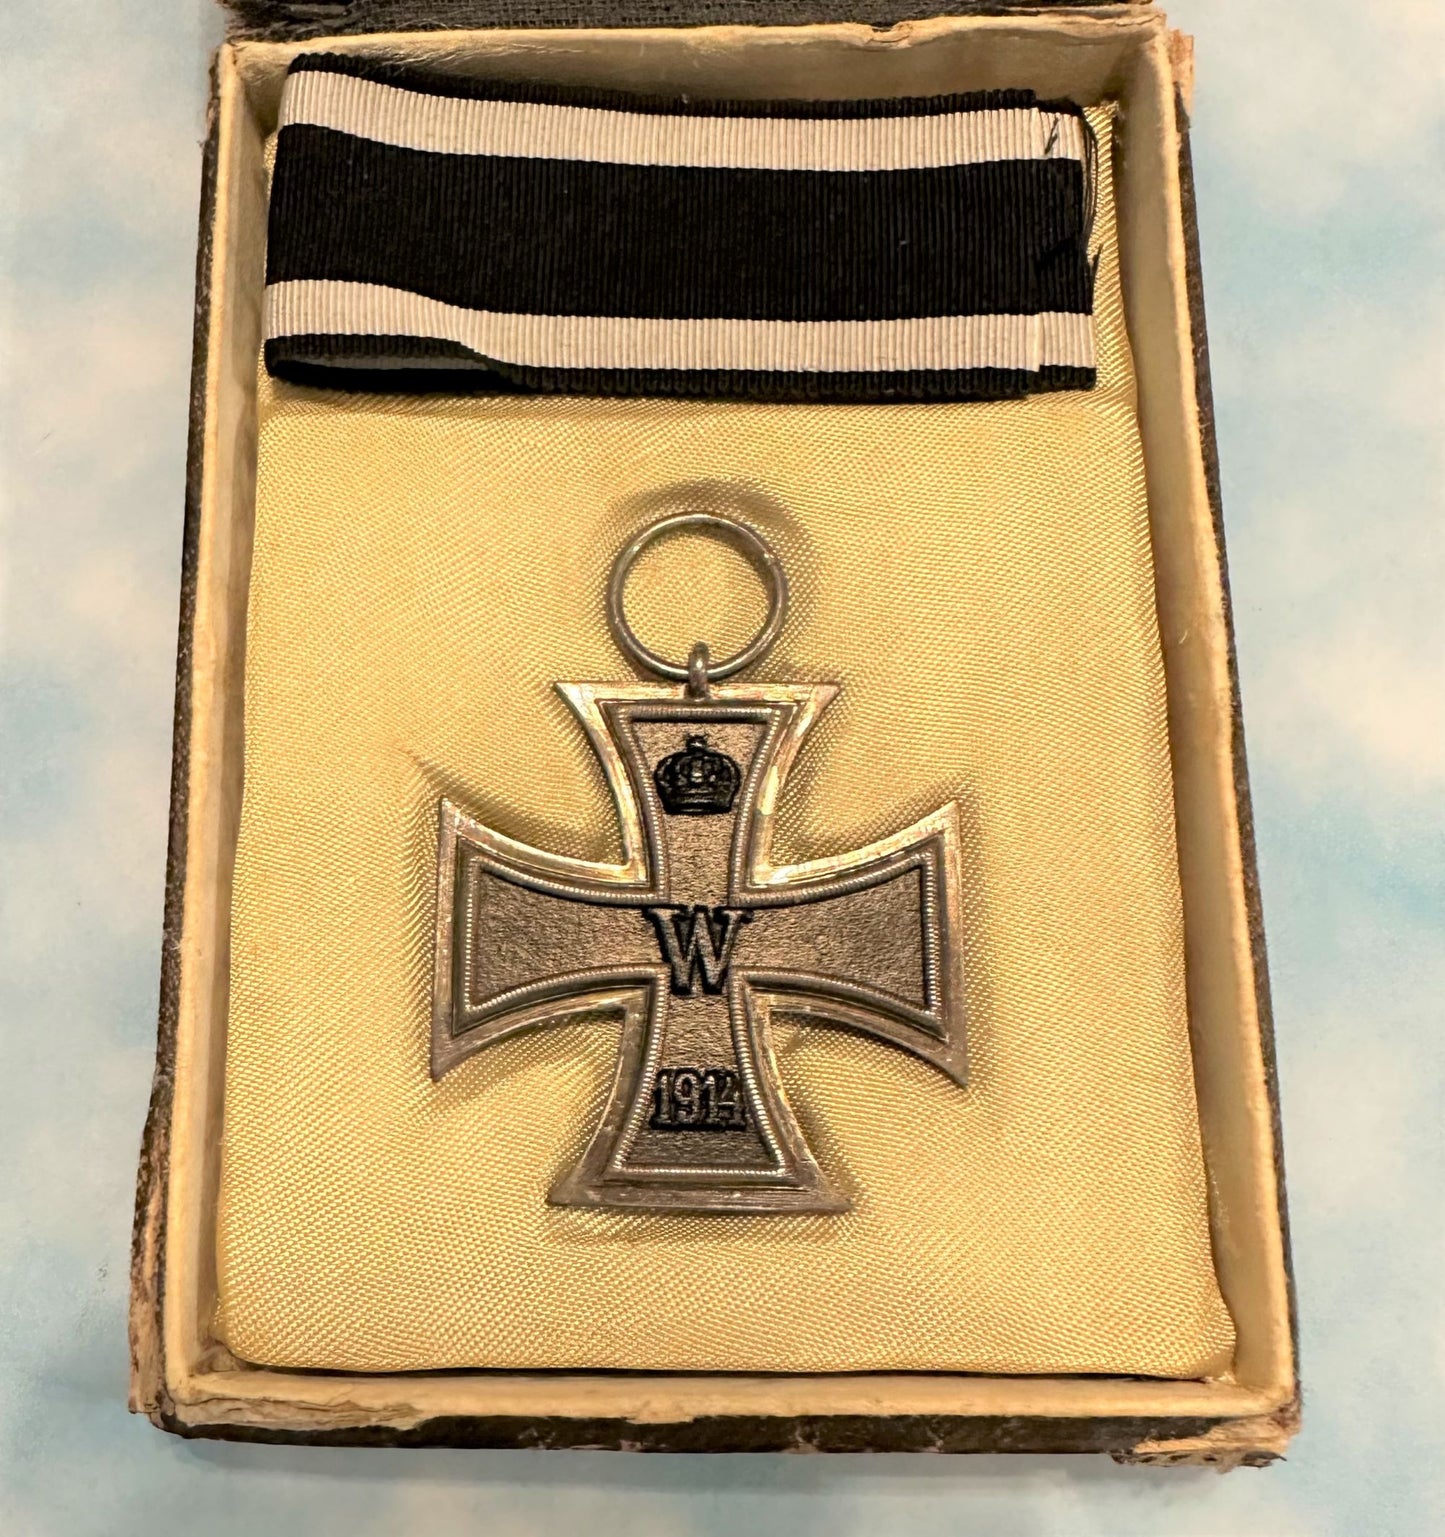 German 1914 Iron Cross 2nd Class in Original Presentation Case - Exceptional Condition - Derrittmeister Militaria Group